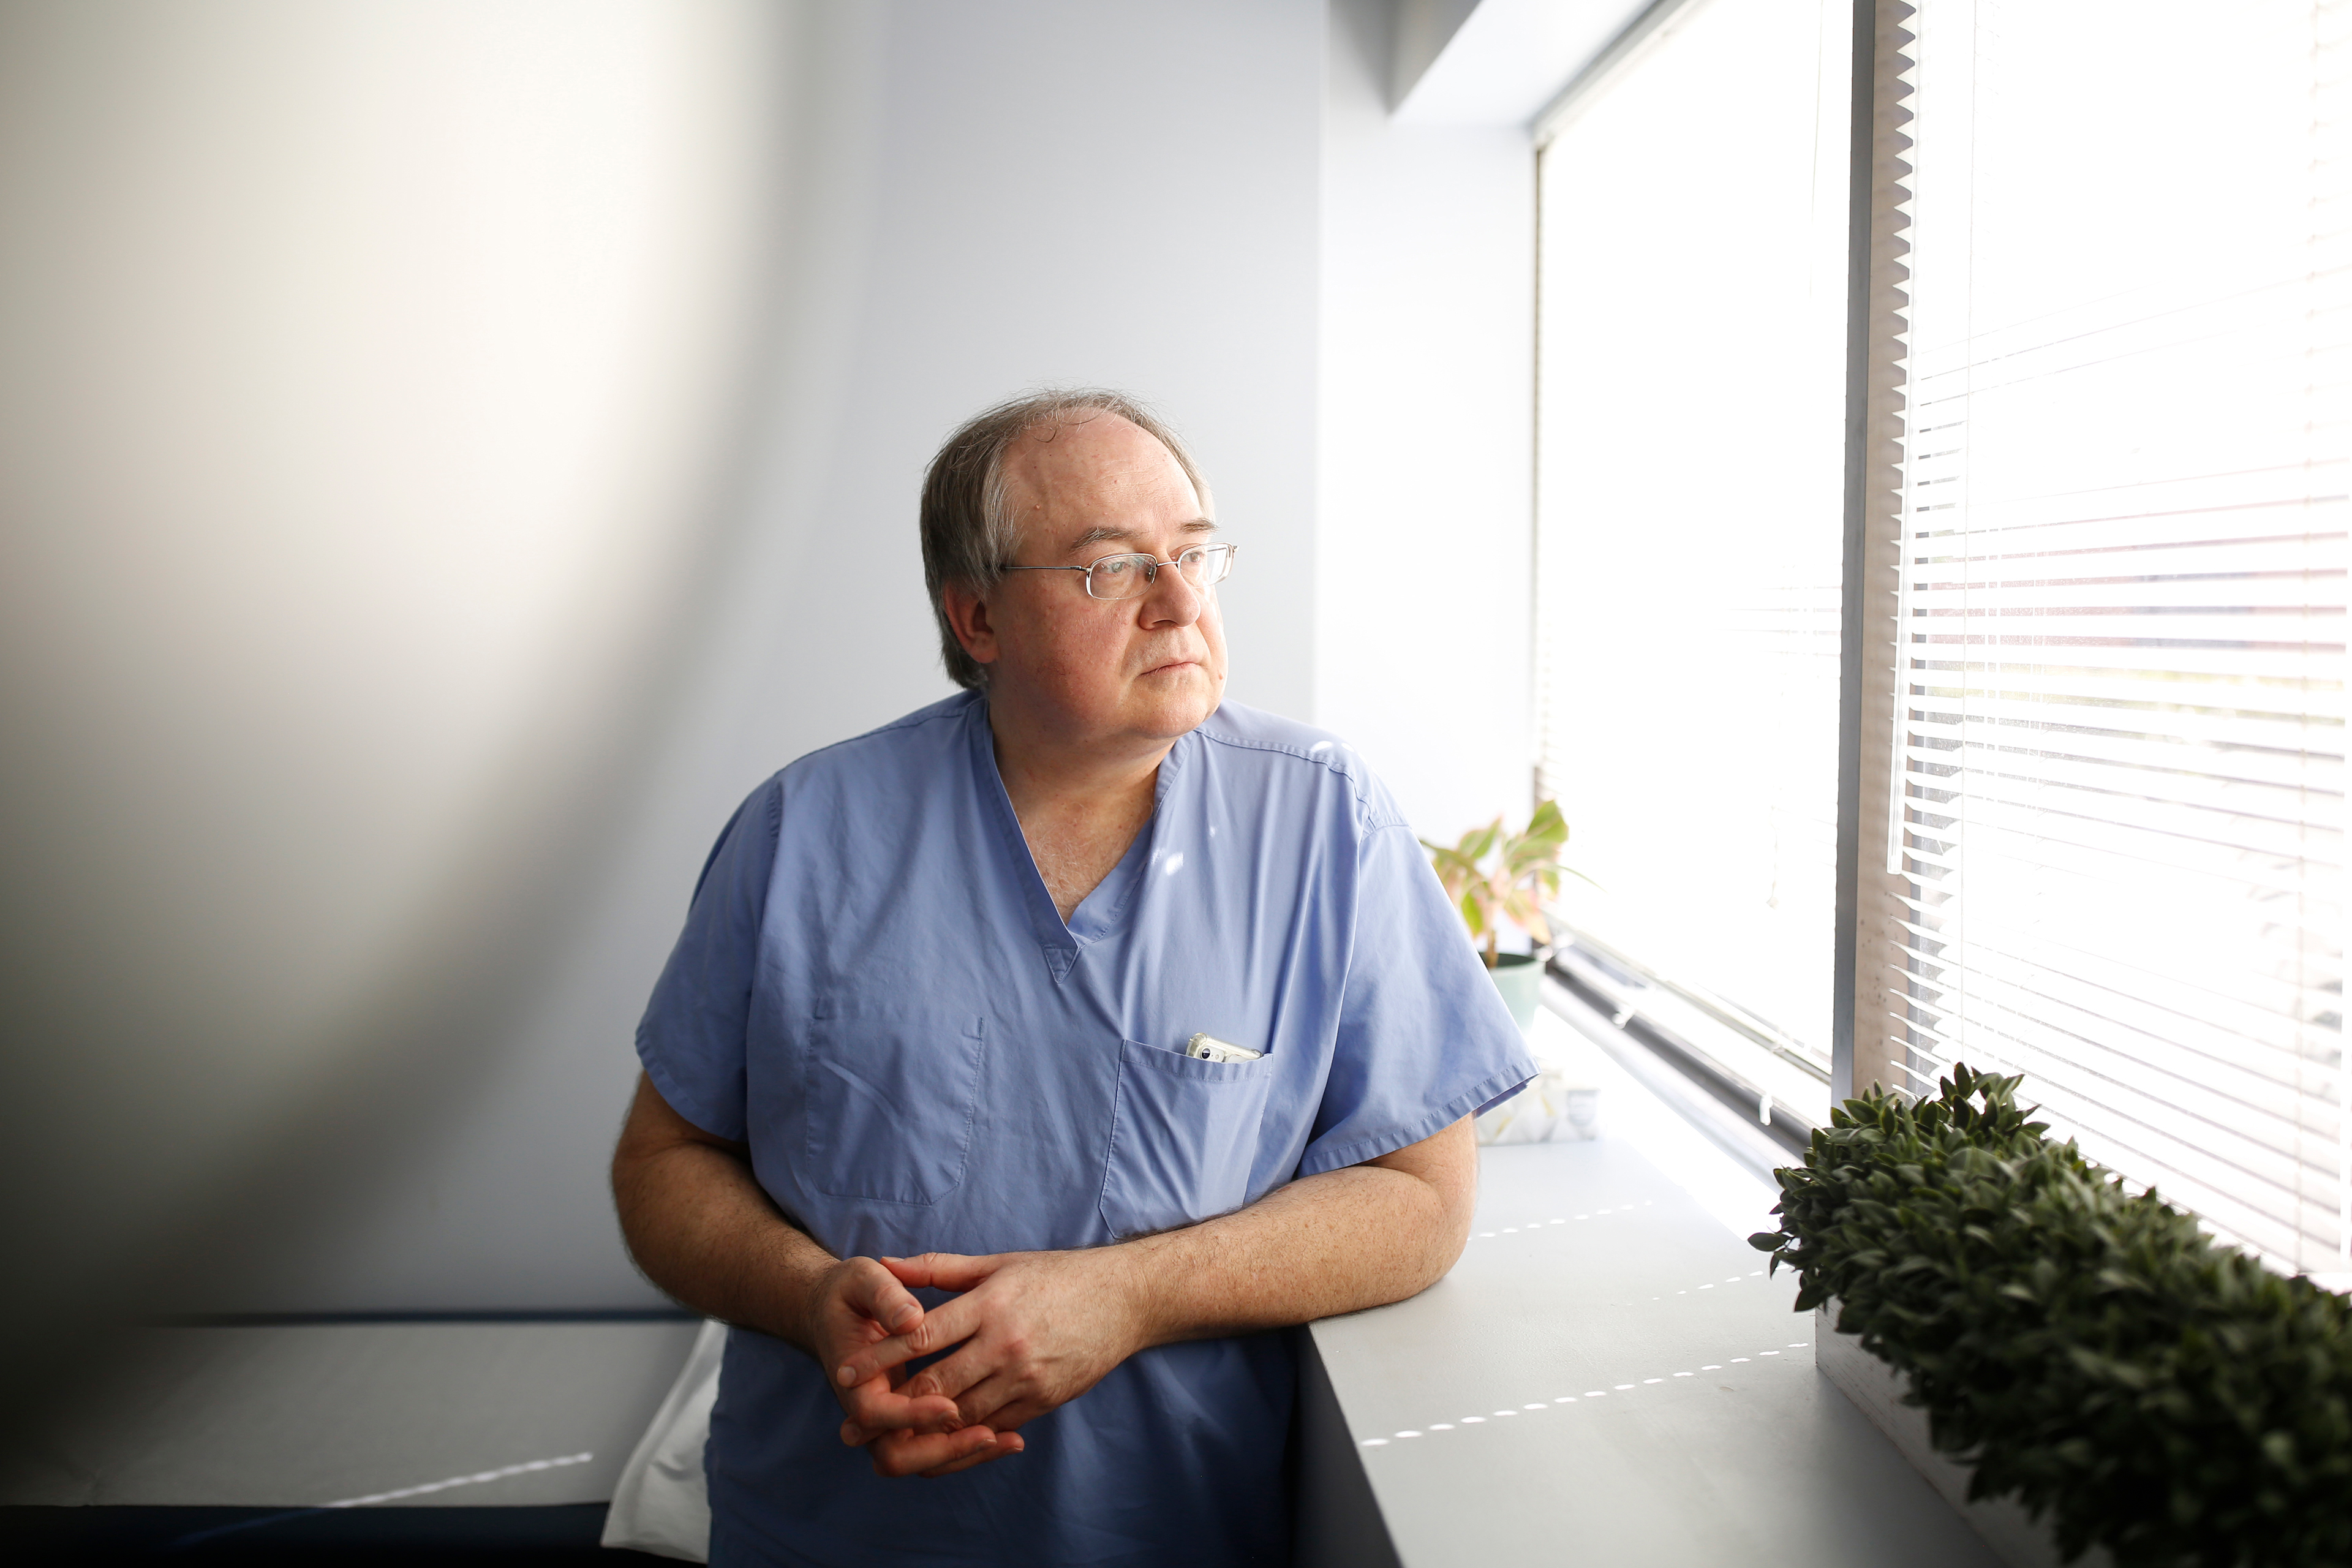 A photo shows Dr. Andrew Bush inside his office. He is looking out of a window to his left.